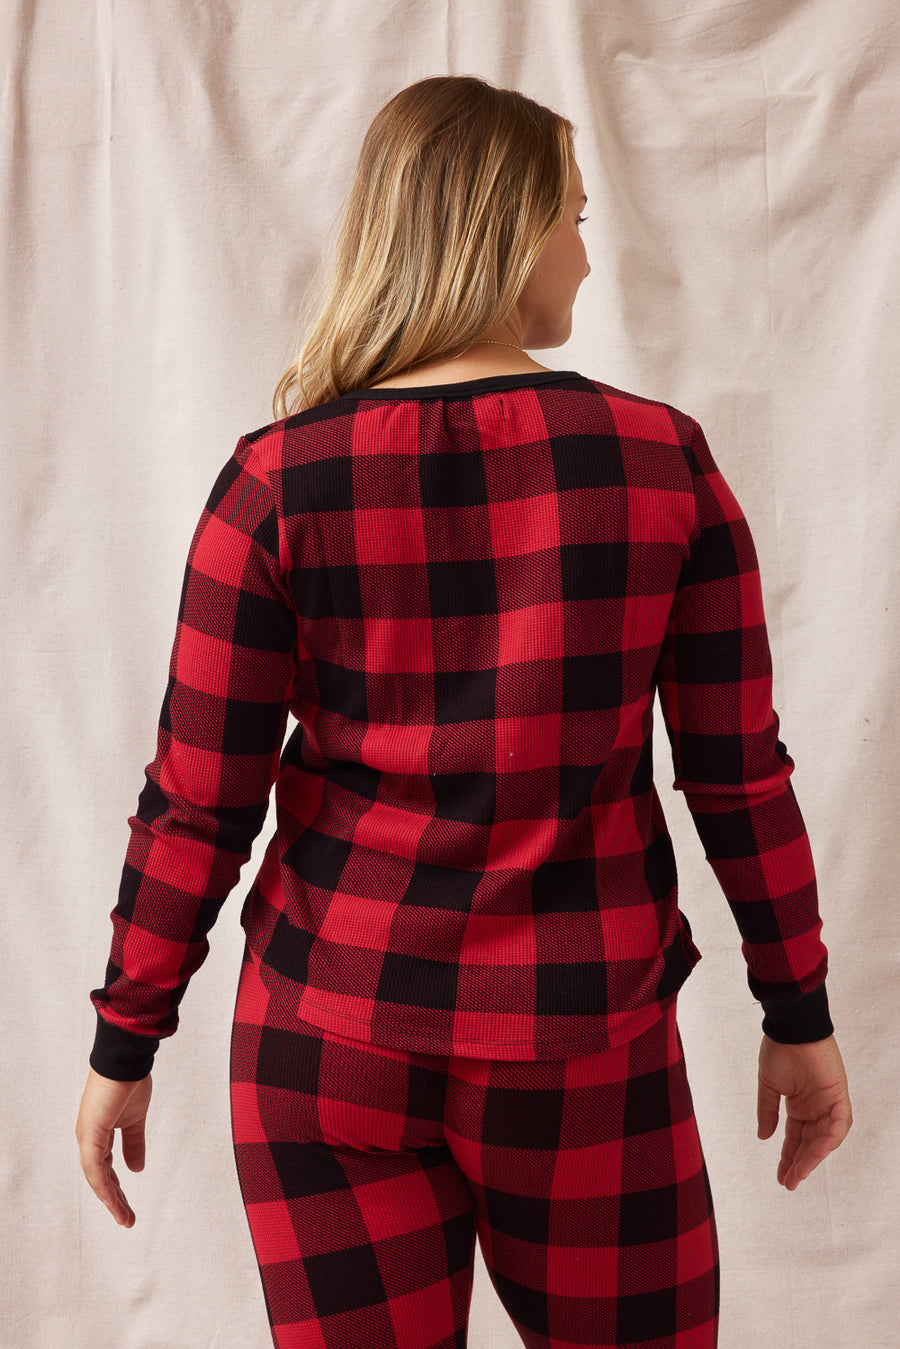 Red and Black Sleepwear Top - Trixxi Clothing